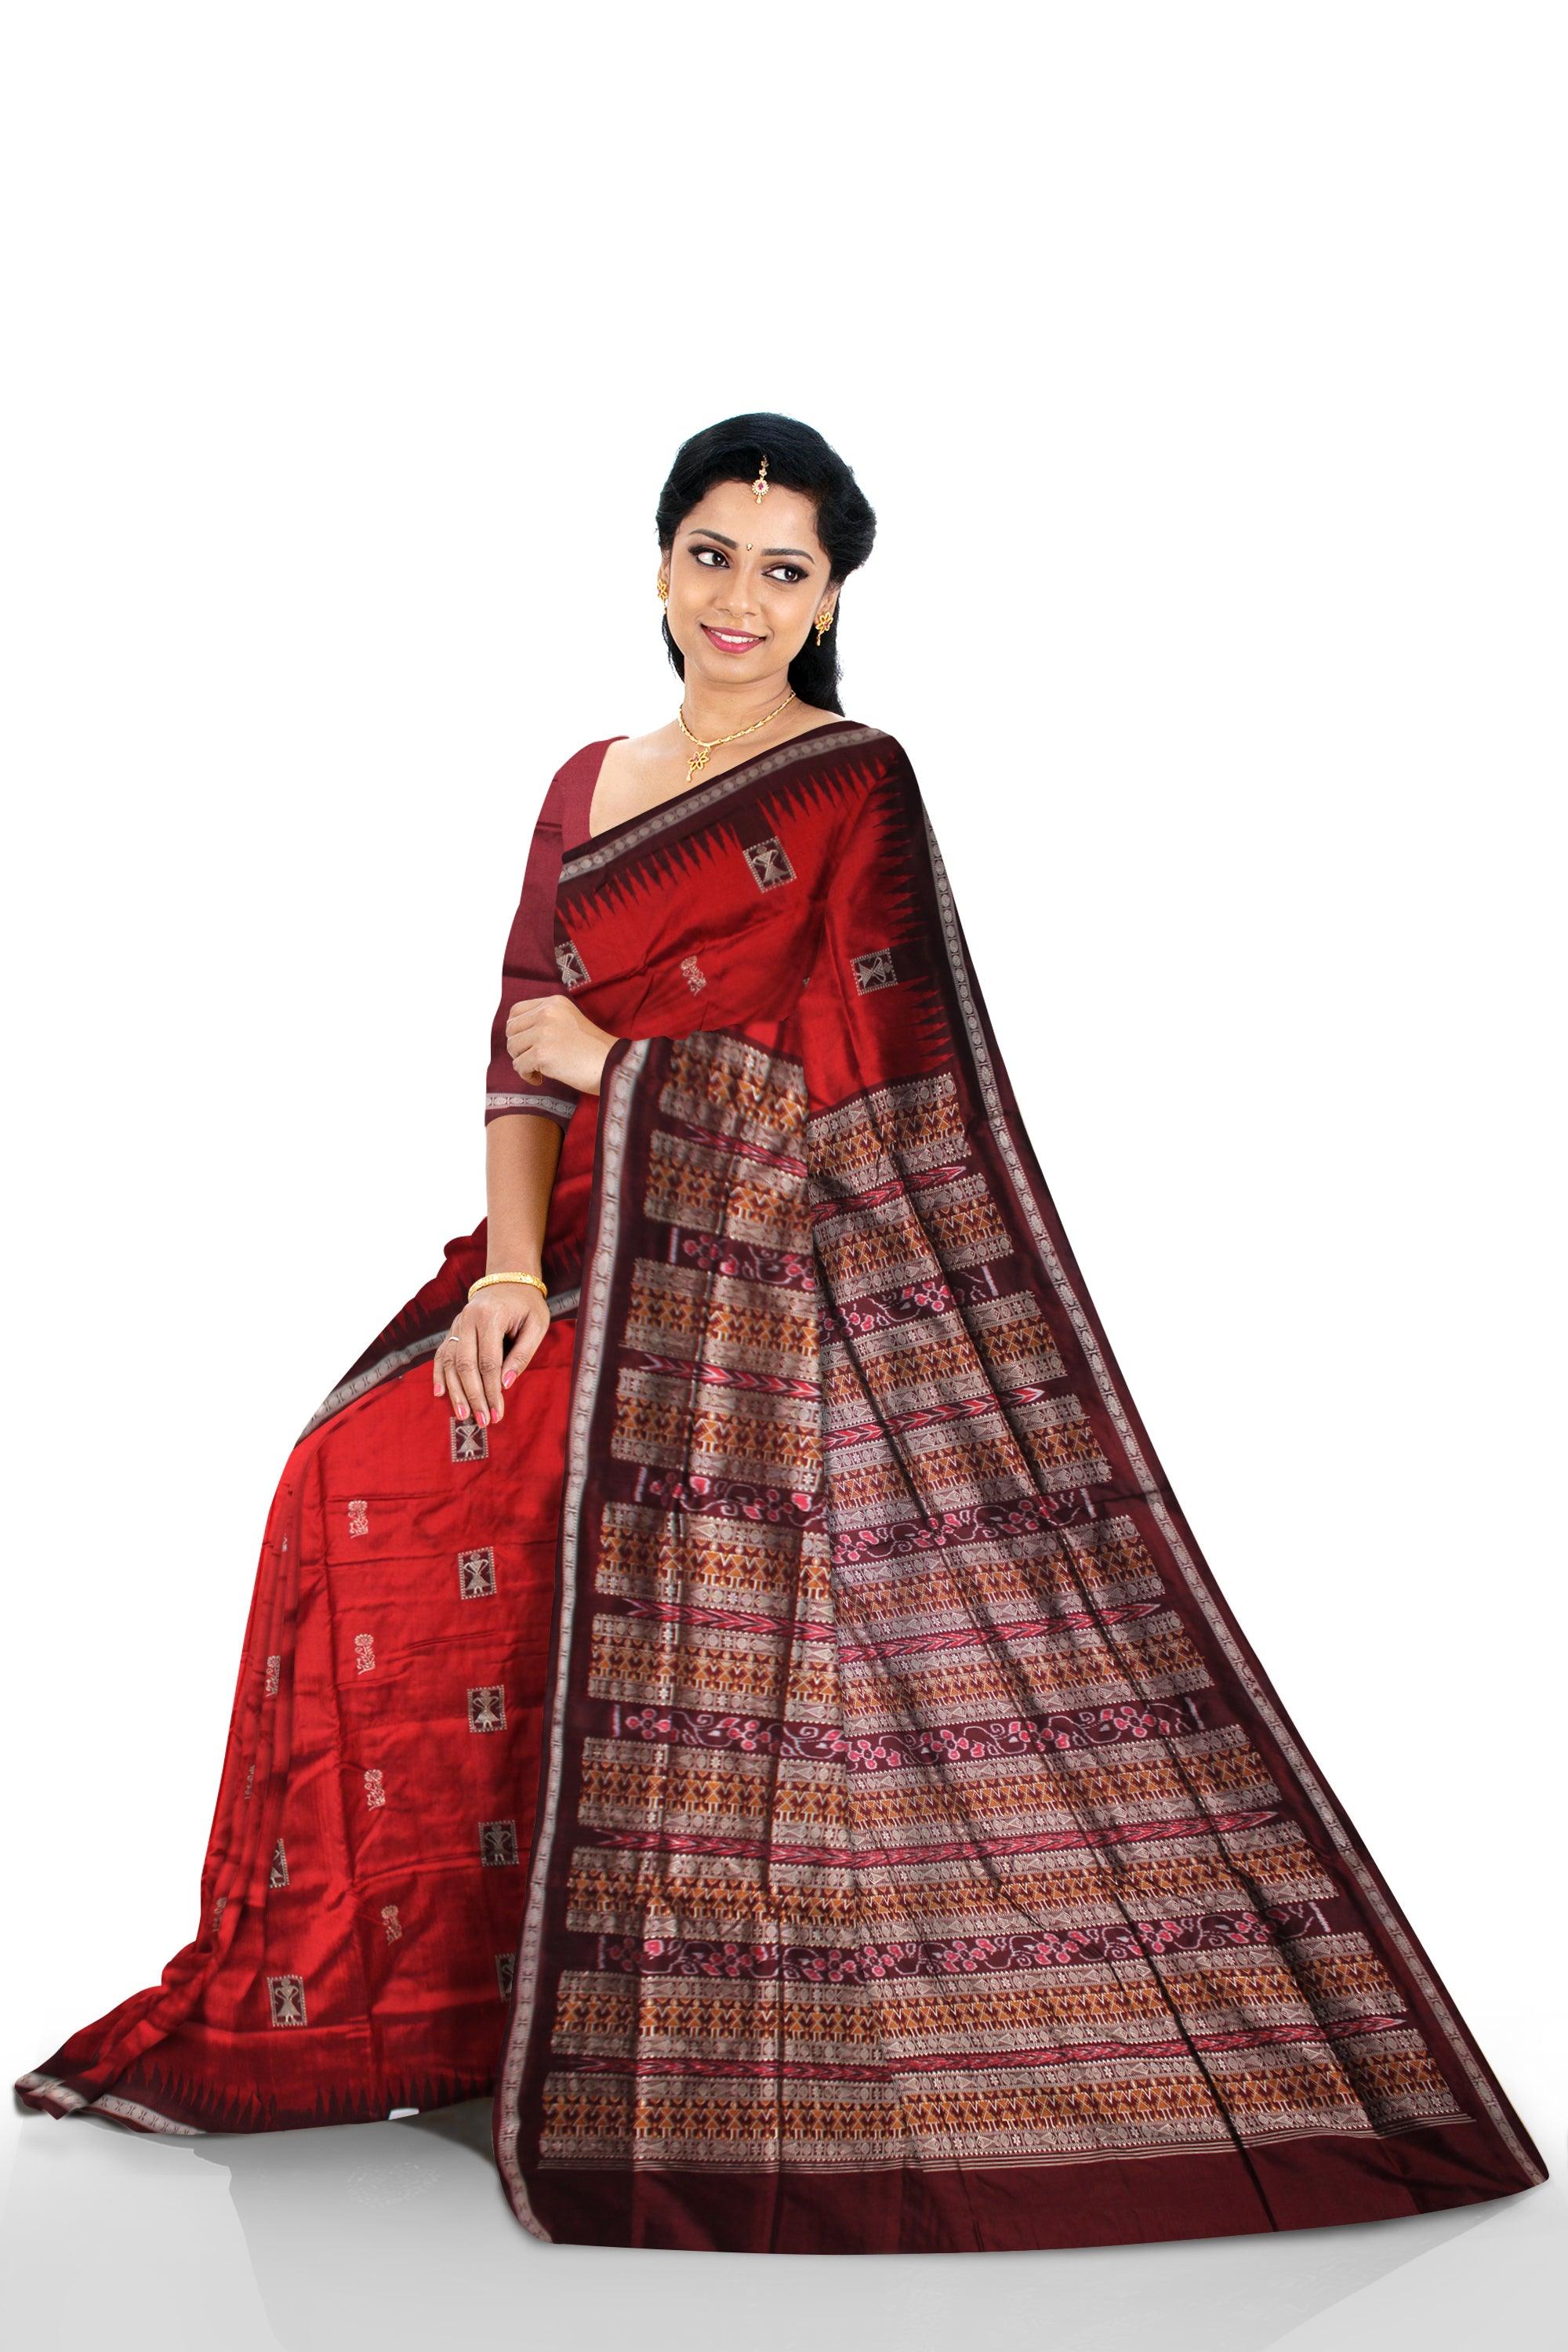 MARRIAGE COLLECTION PATA SAREE IN BANDHA DESIGN IN RED AND COFFEE COLOR , WITH BLOUSE PIECE. - Koshali Arts & Crafts Enterprise